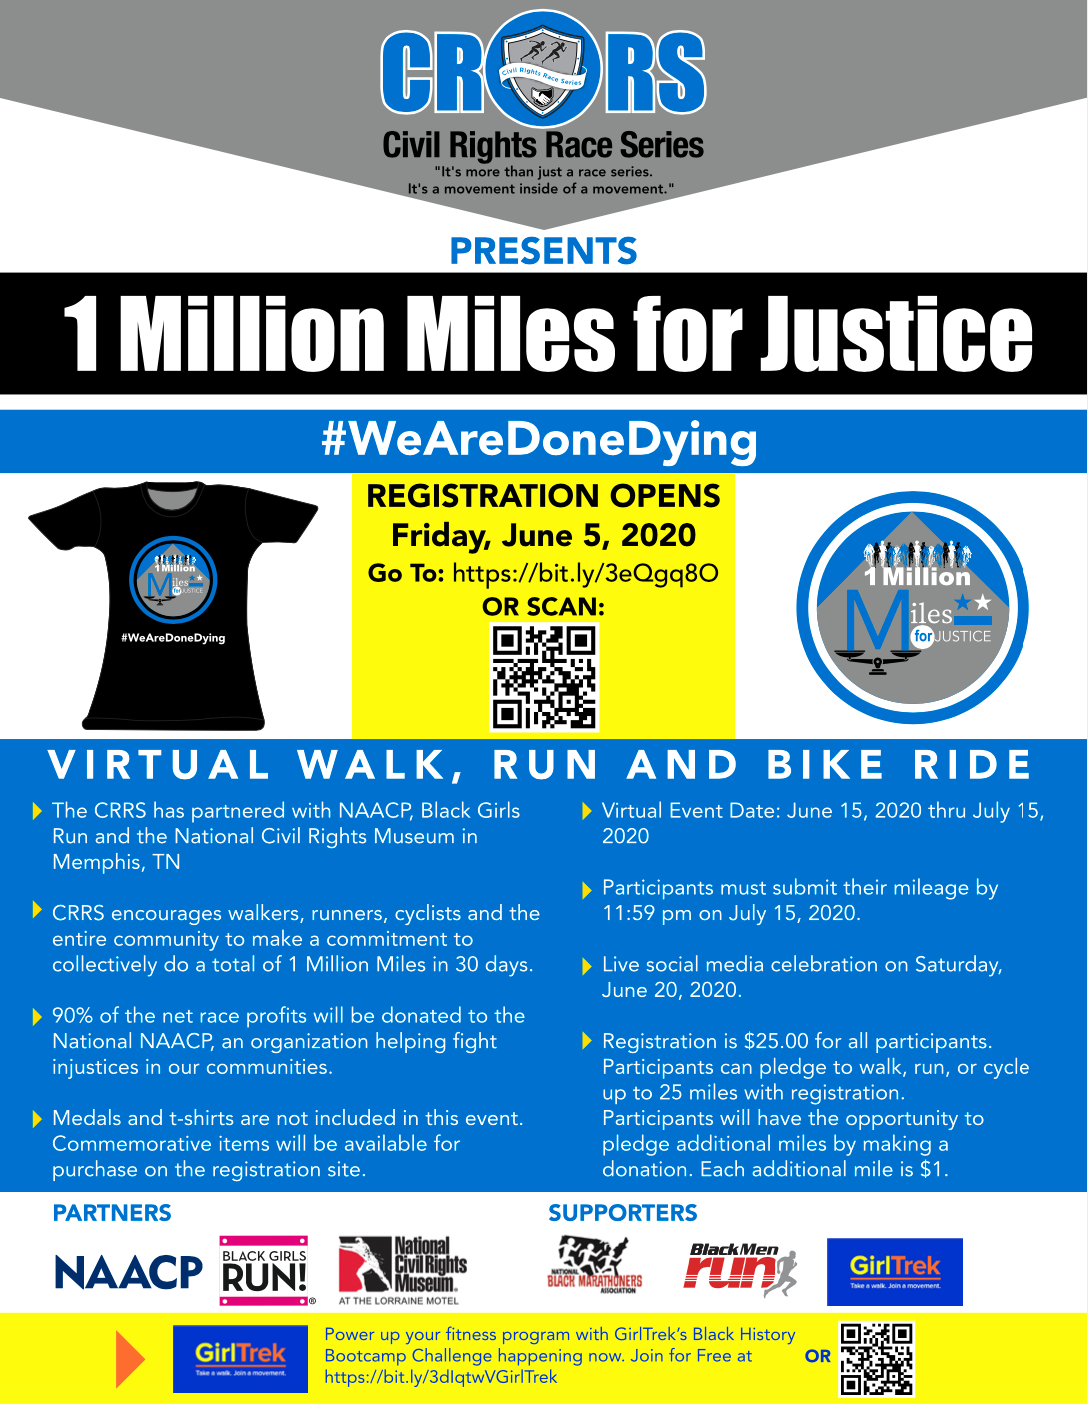 1 Million Miles for Justice Virtual Run/Walk/Bike - June 15th to July 15th